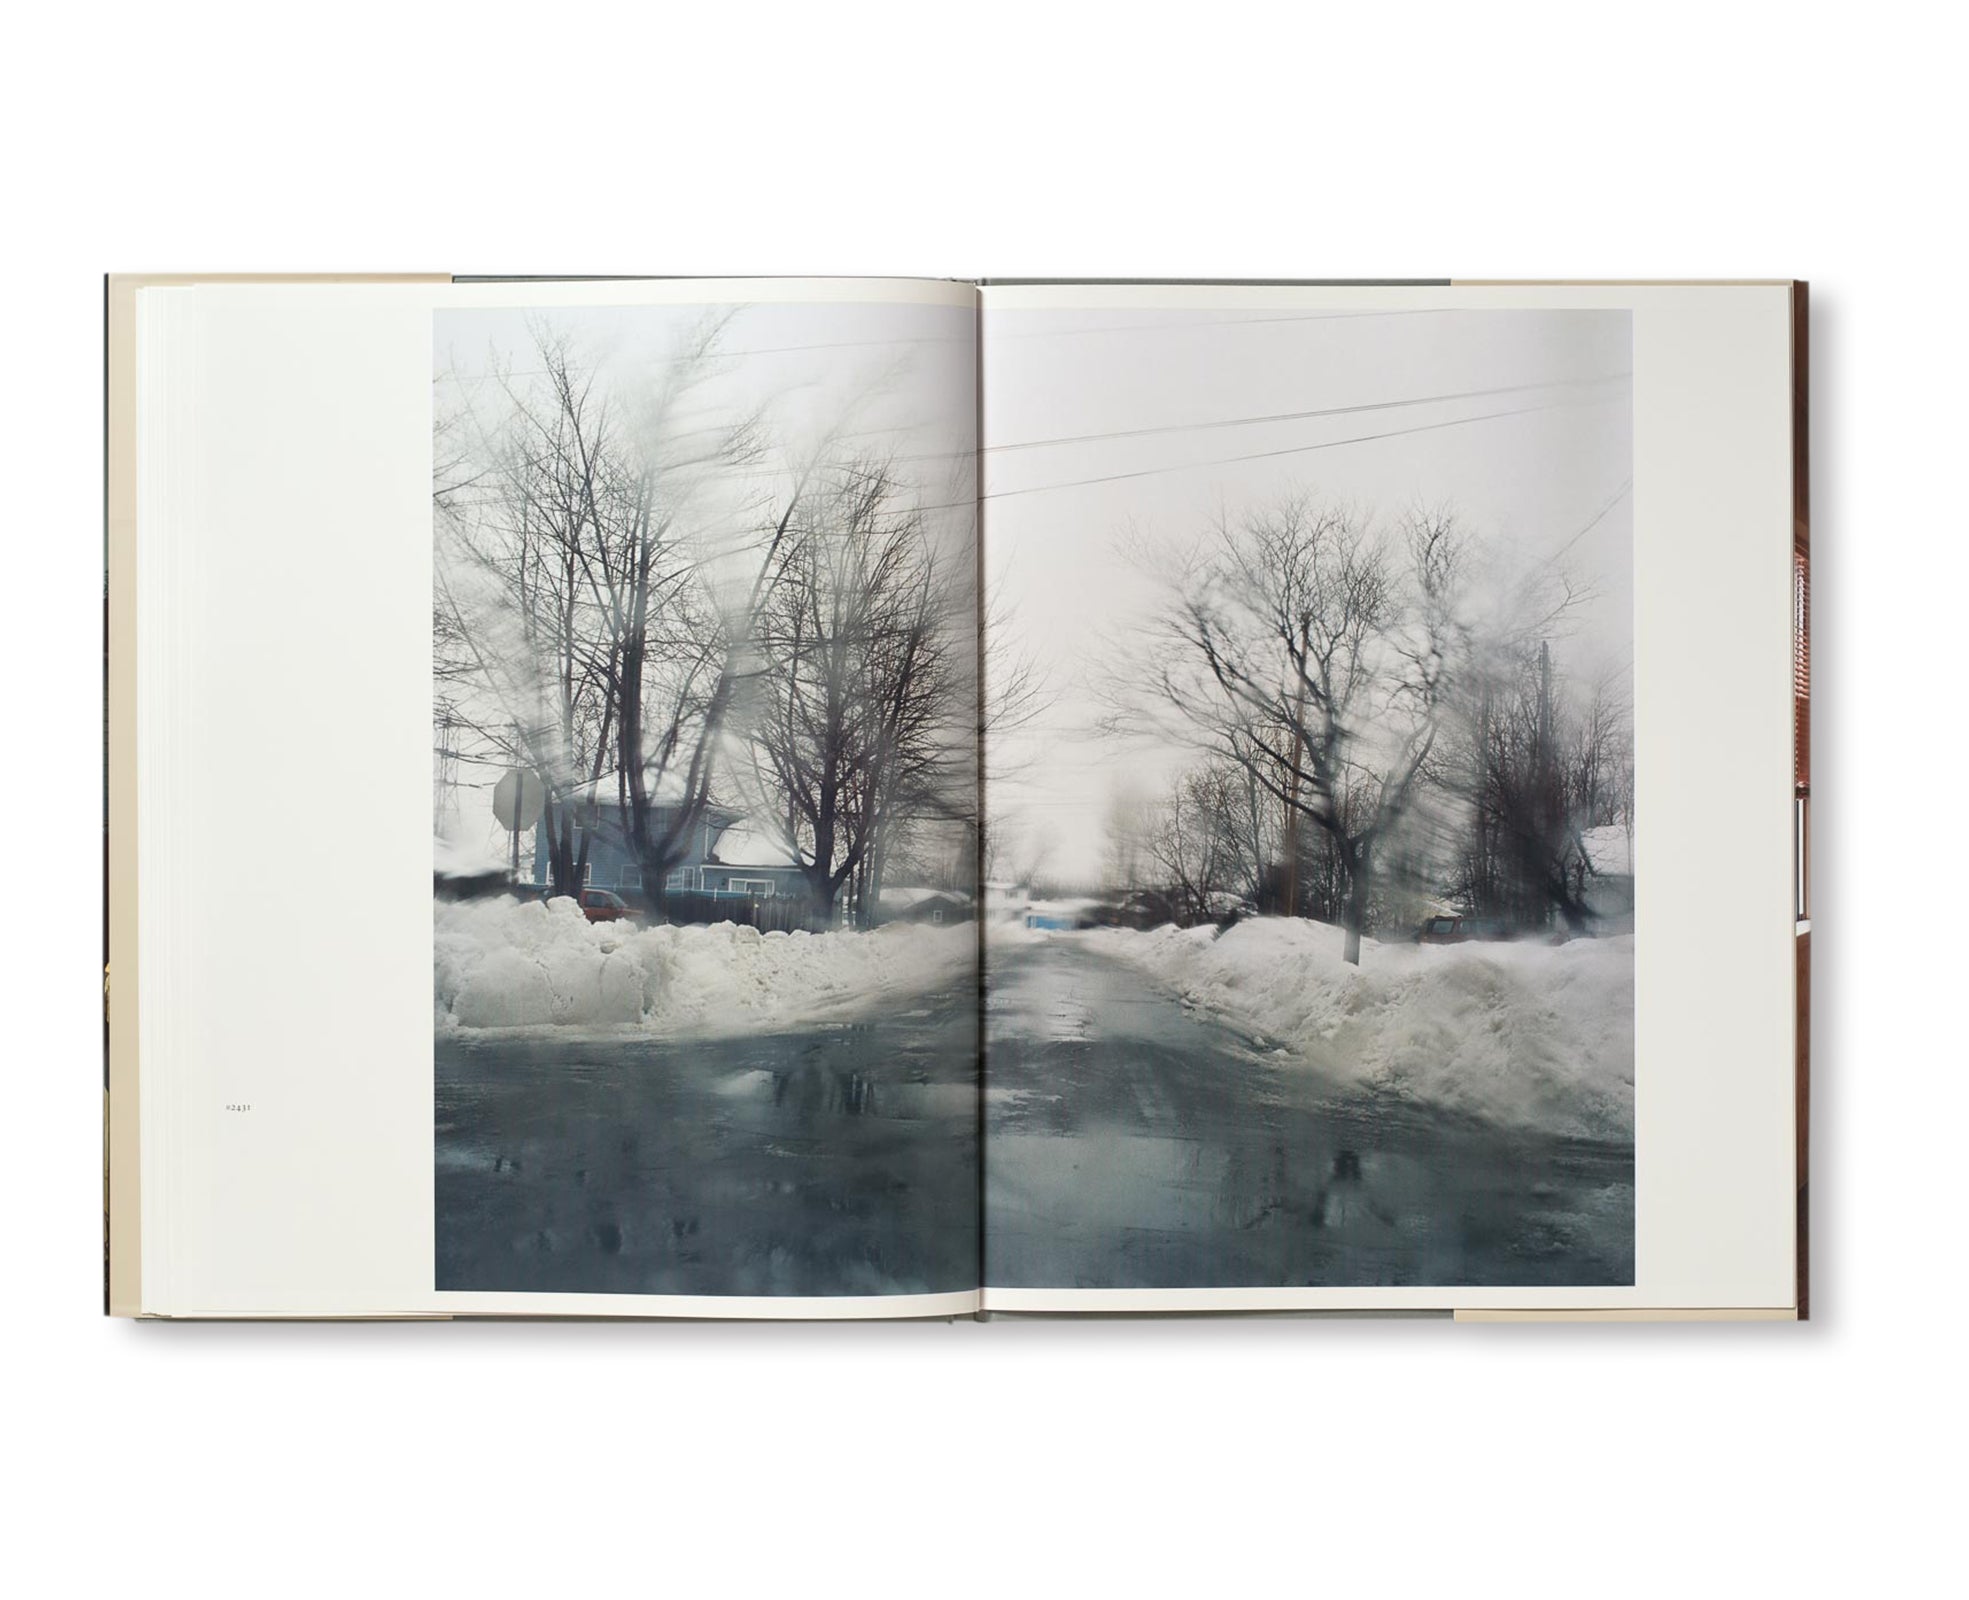 HOUSE HUNTING by Todd Hido [SPECIAL EDITION]